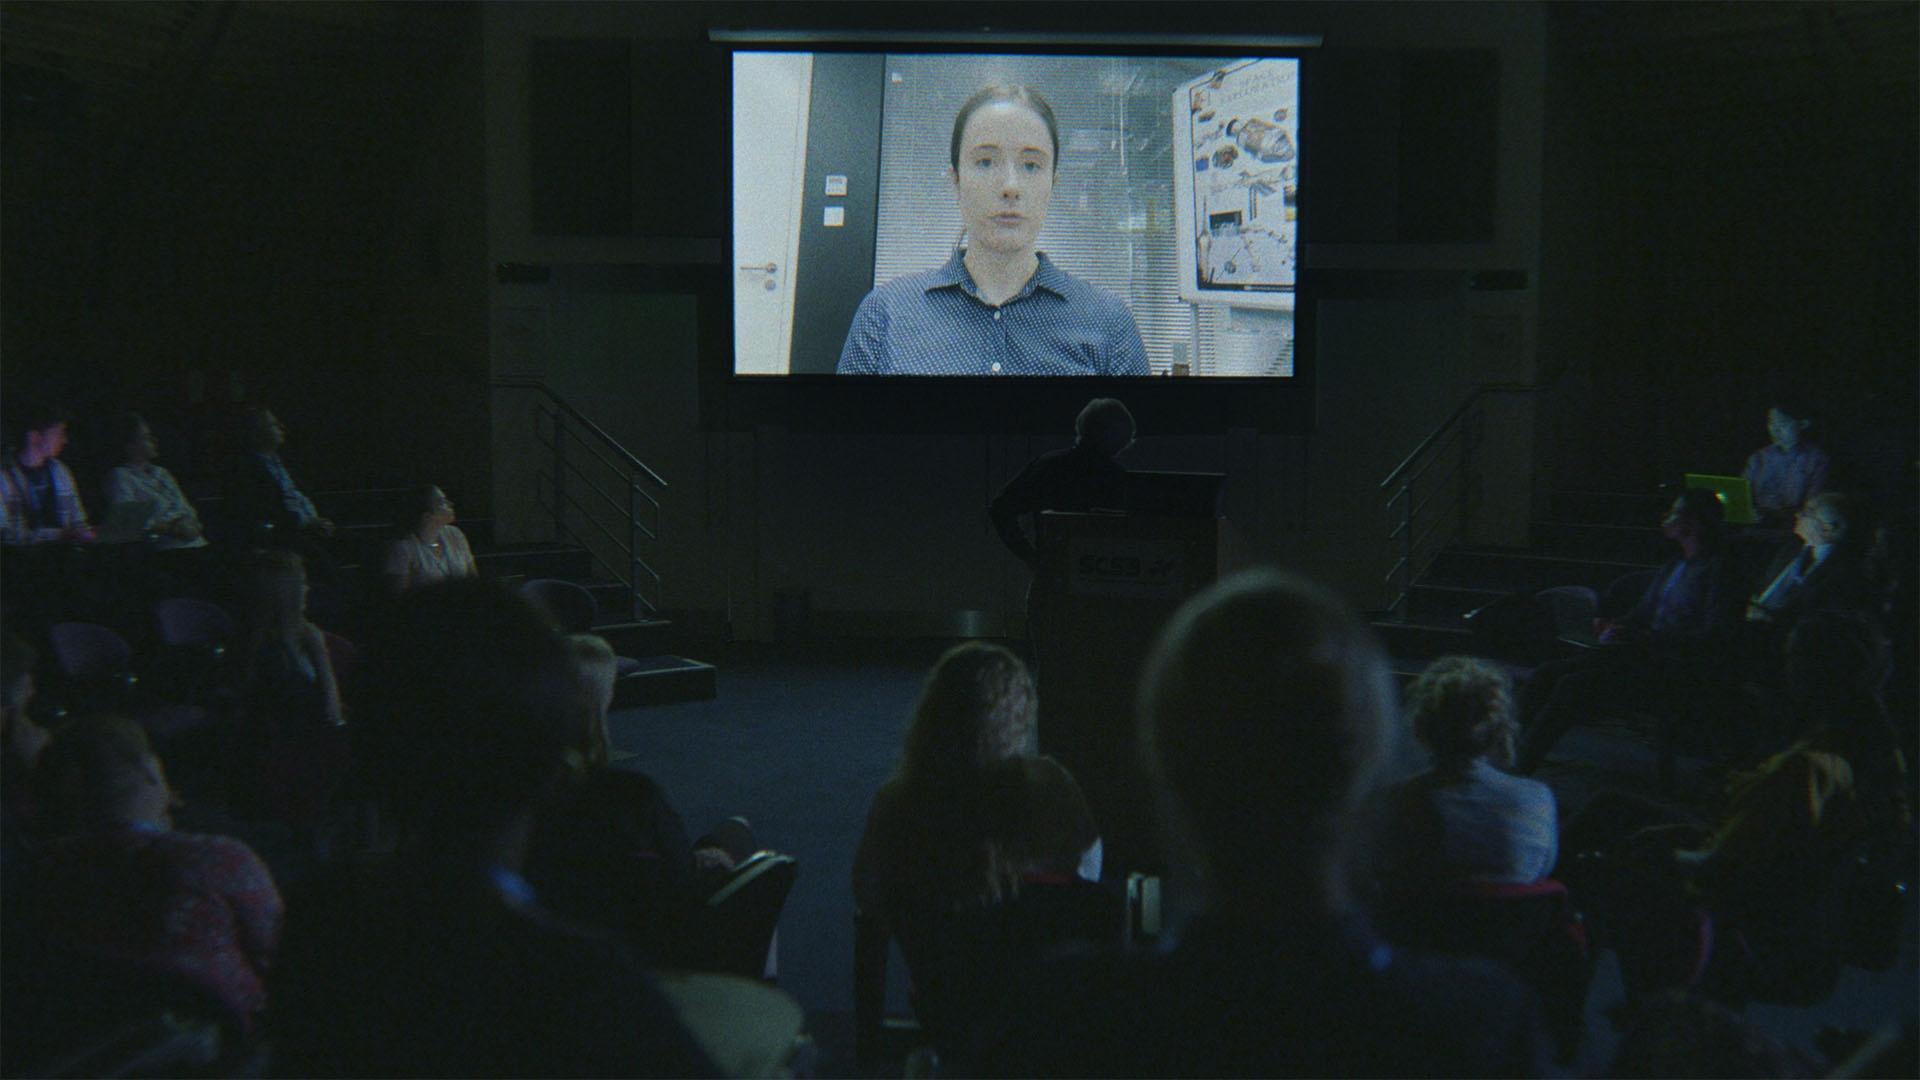 A scientist gives a presentation via video call to a conference audience.